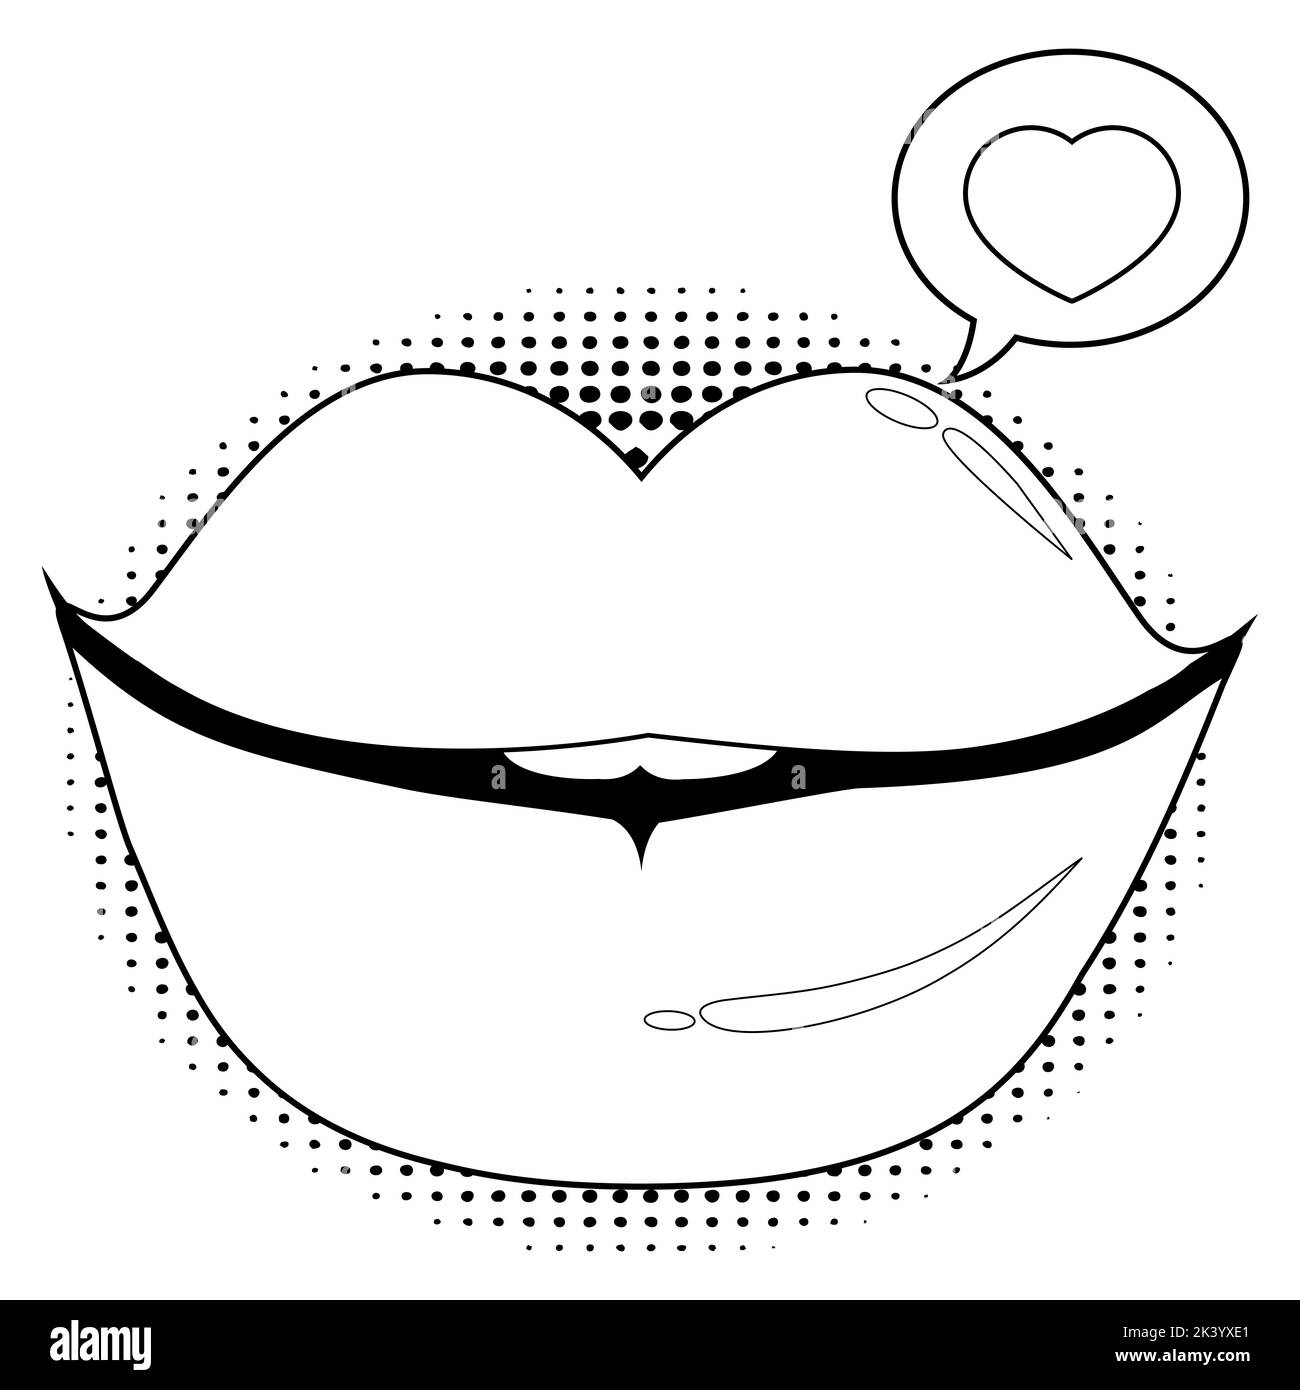 Female lips with speech bubble and a heart. Black and white coloring page. Stock Photo